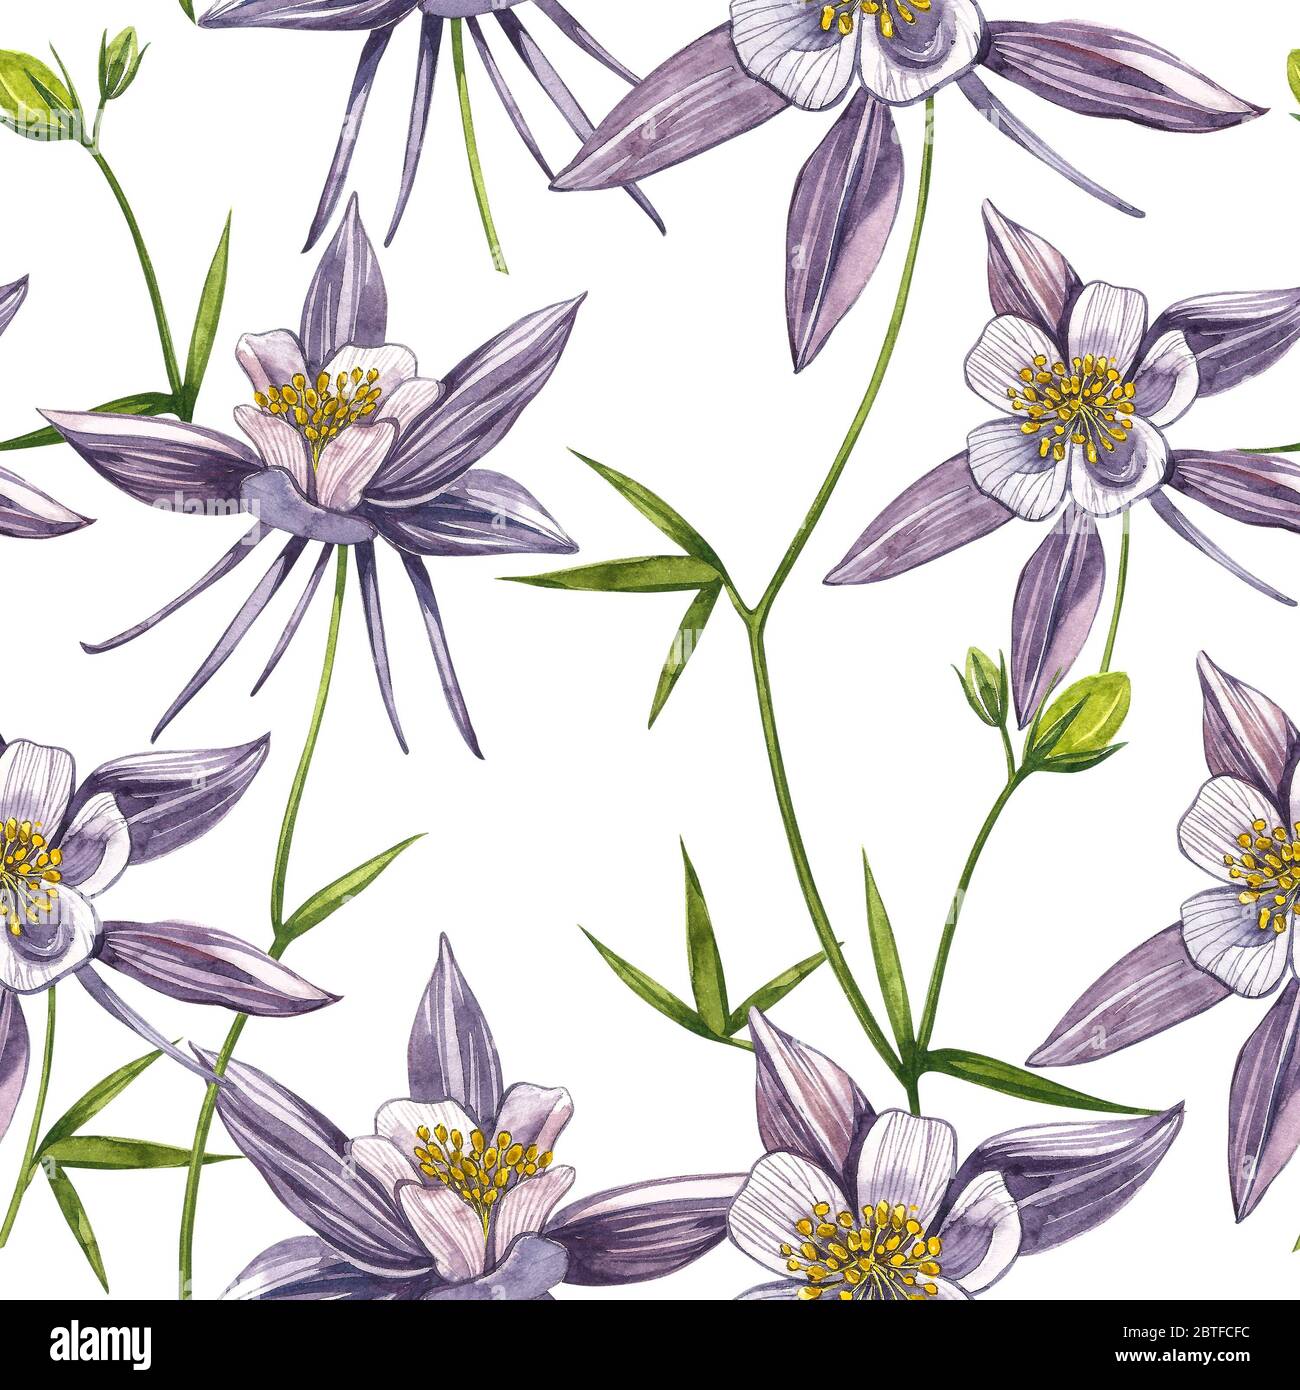 Double Columbine flowers. Seamless pattern. Collection of hand drawn flowers and plants. Watercolor set of flowers and leaves, hand drawn floral illus Stock Photo